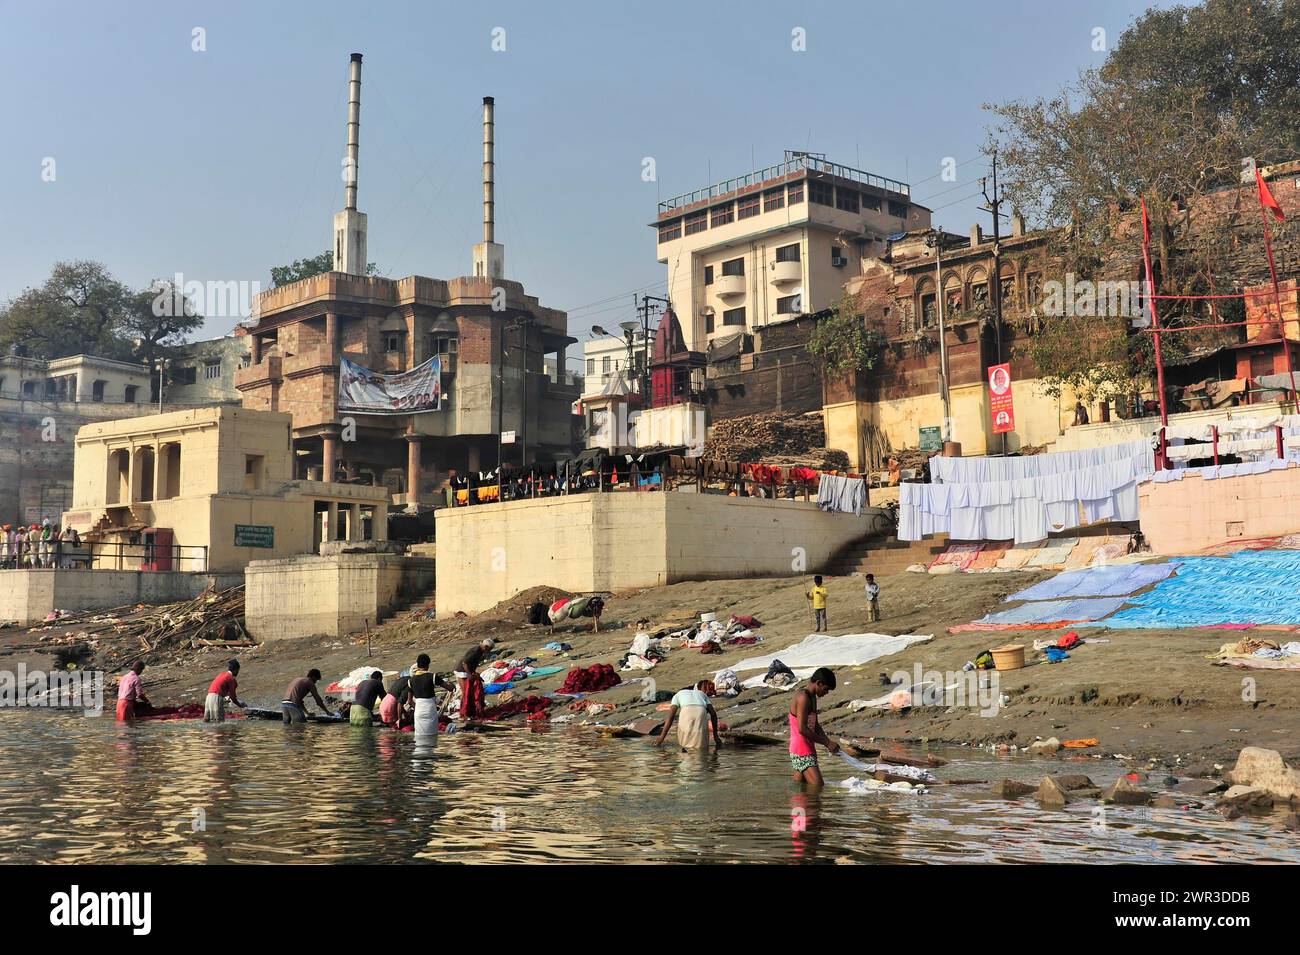 Community washing of clothes on the riverbank with a view of buildings and cultural life, Varanasi, Uttar Pradesh, India Stock Photo